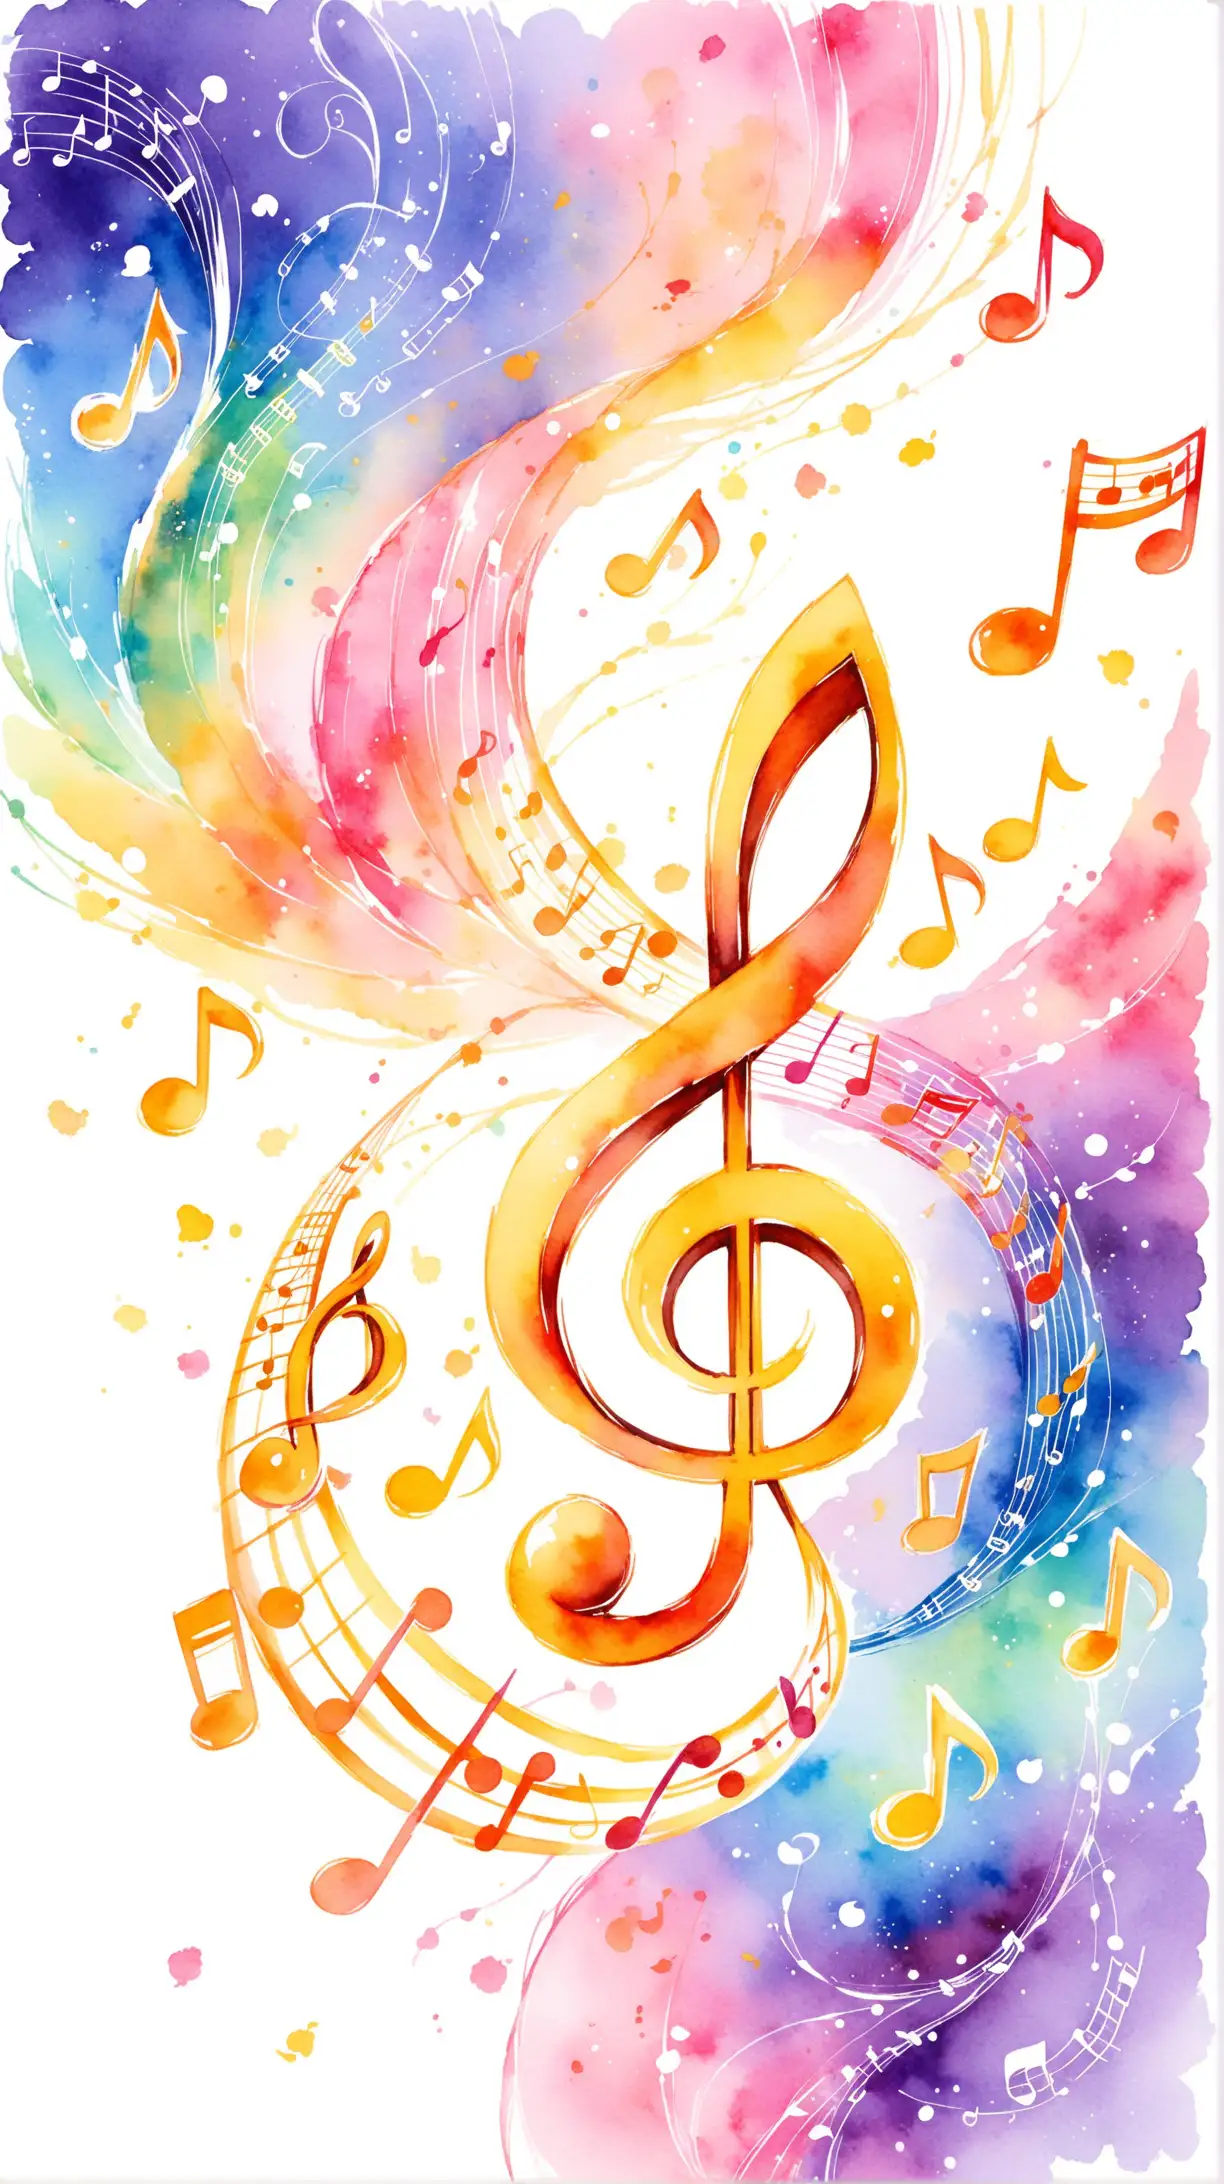 Whimsical Anime Watercolor Painting Musical Notes Taking Flight